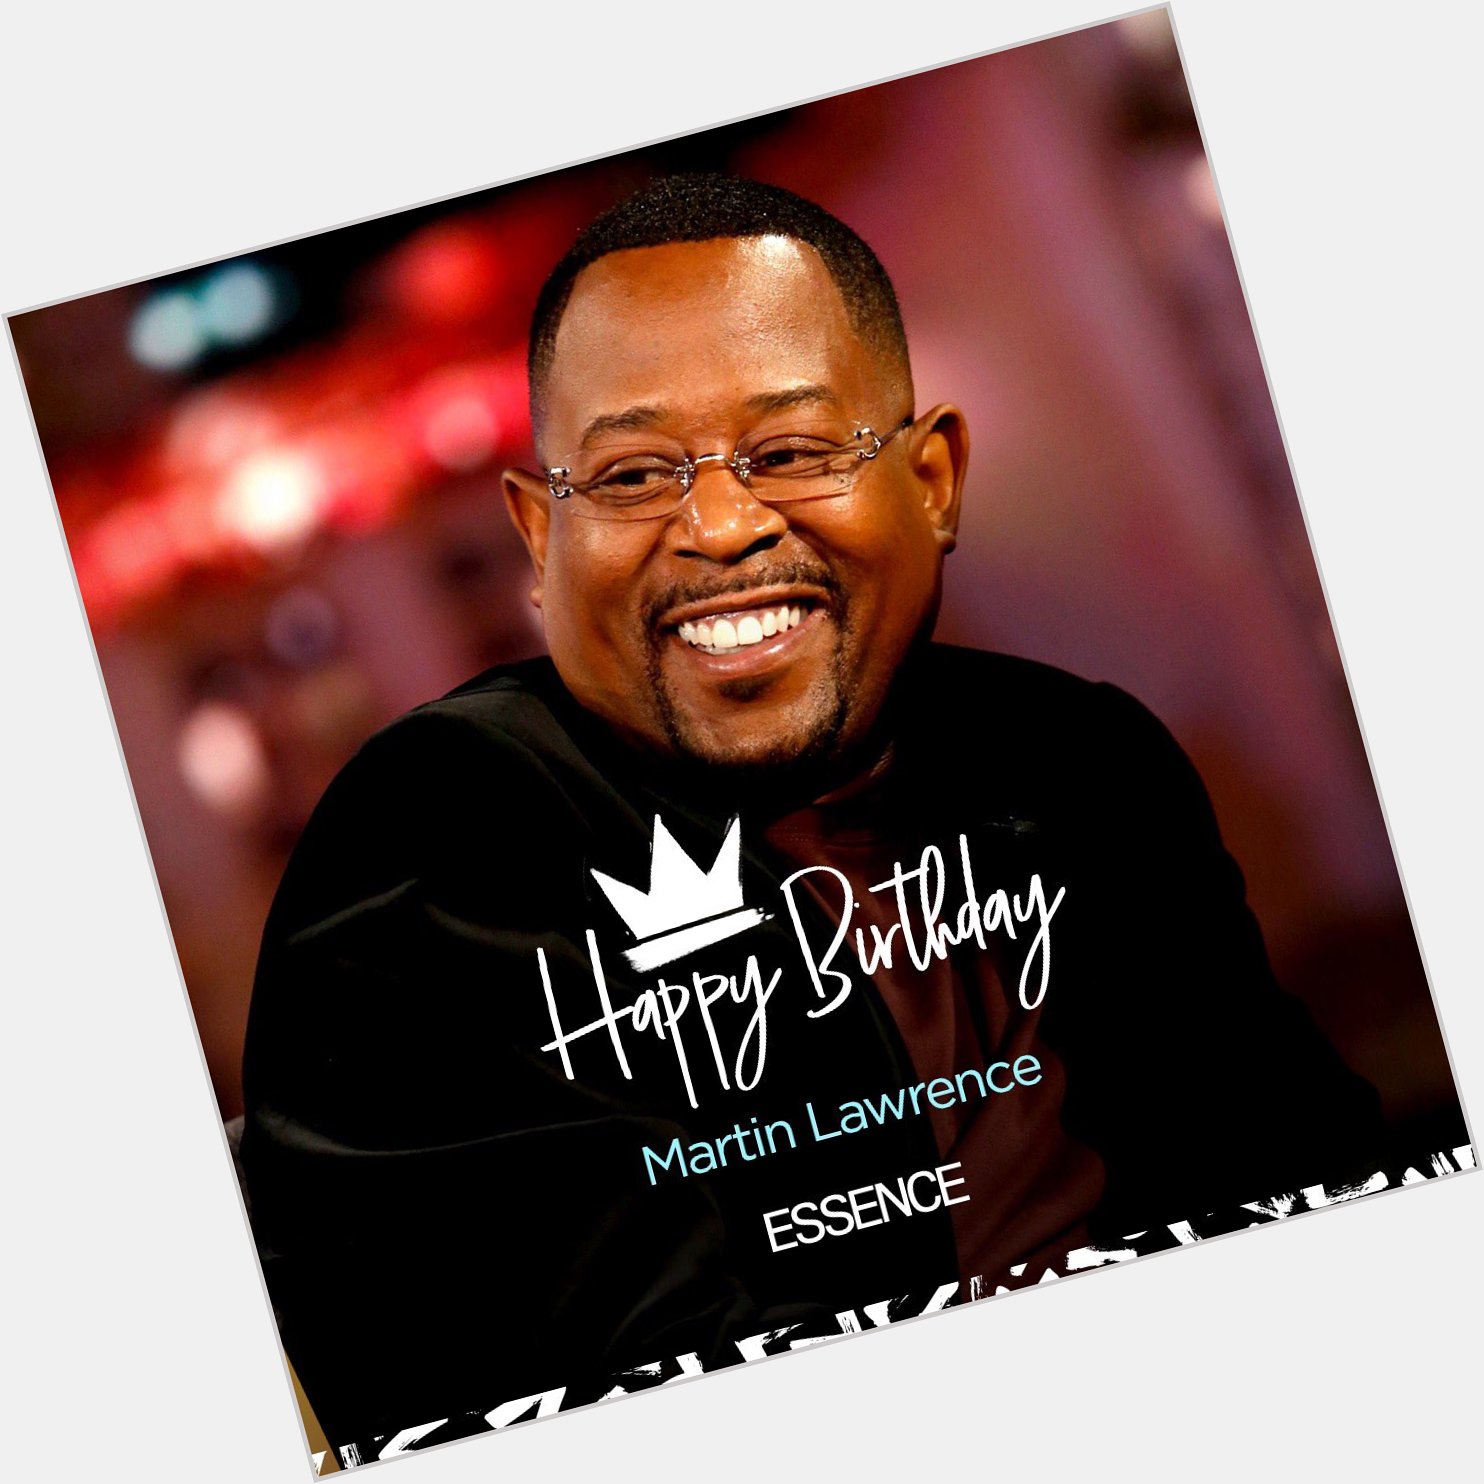 Happy birthday, Martin Lawrence! Drop your favorite Martin line or movie?  